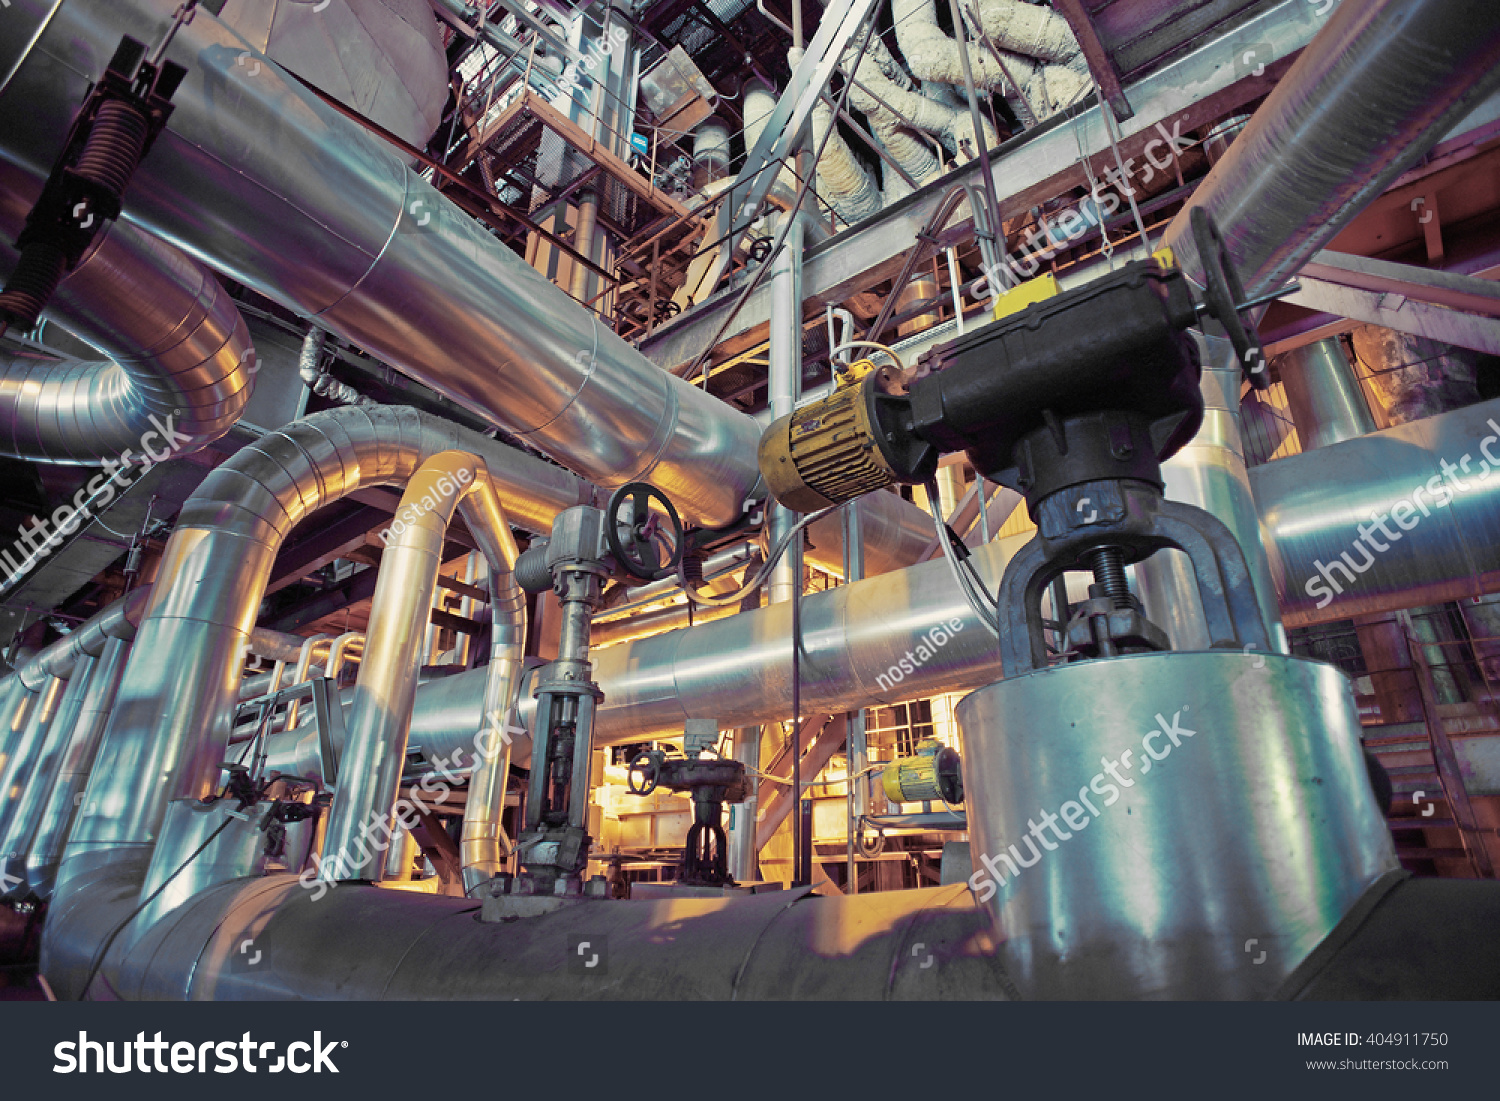 Equipment, cables and piping as found inside of a industrial power plant #404911750